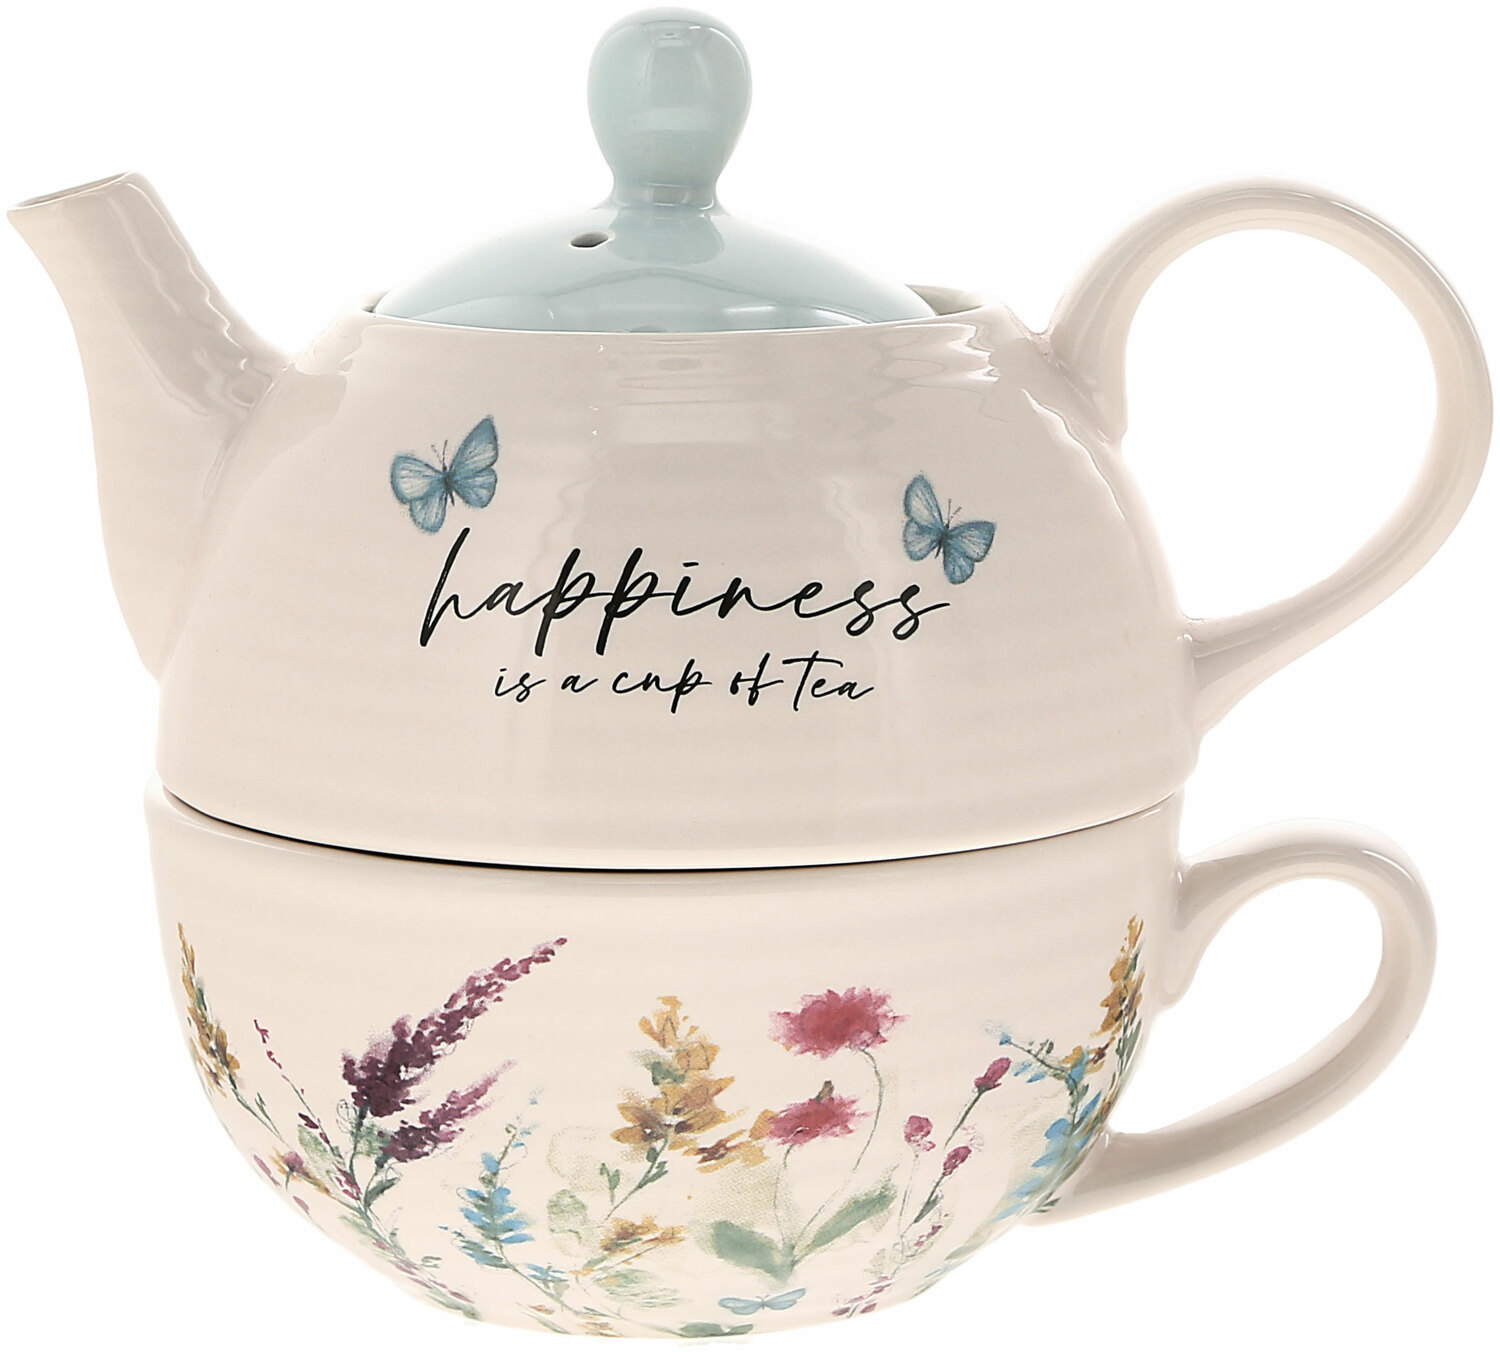 Happiness by Meadows of Joy - Happiness - Tea for One
(14.5 oz Teapot & 10 oz Cup)